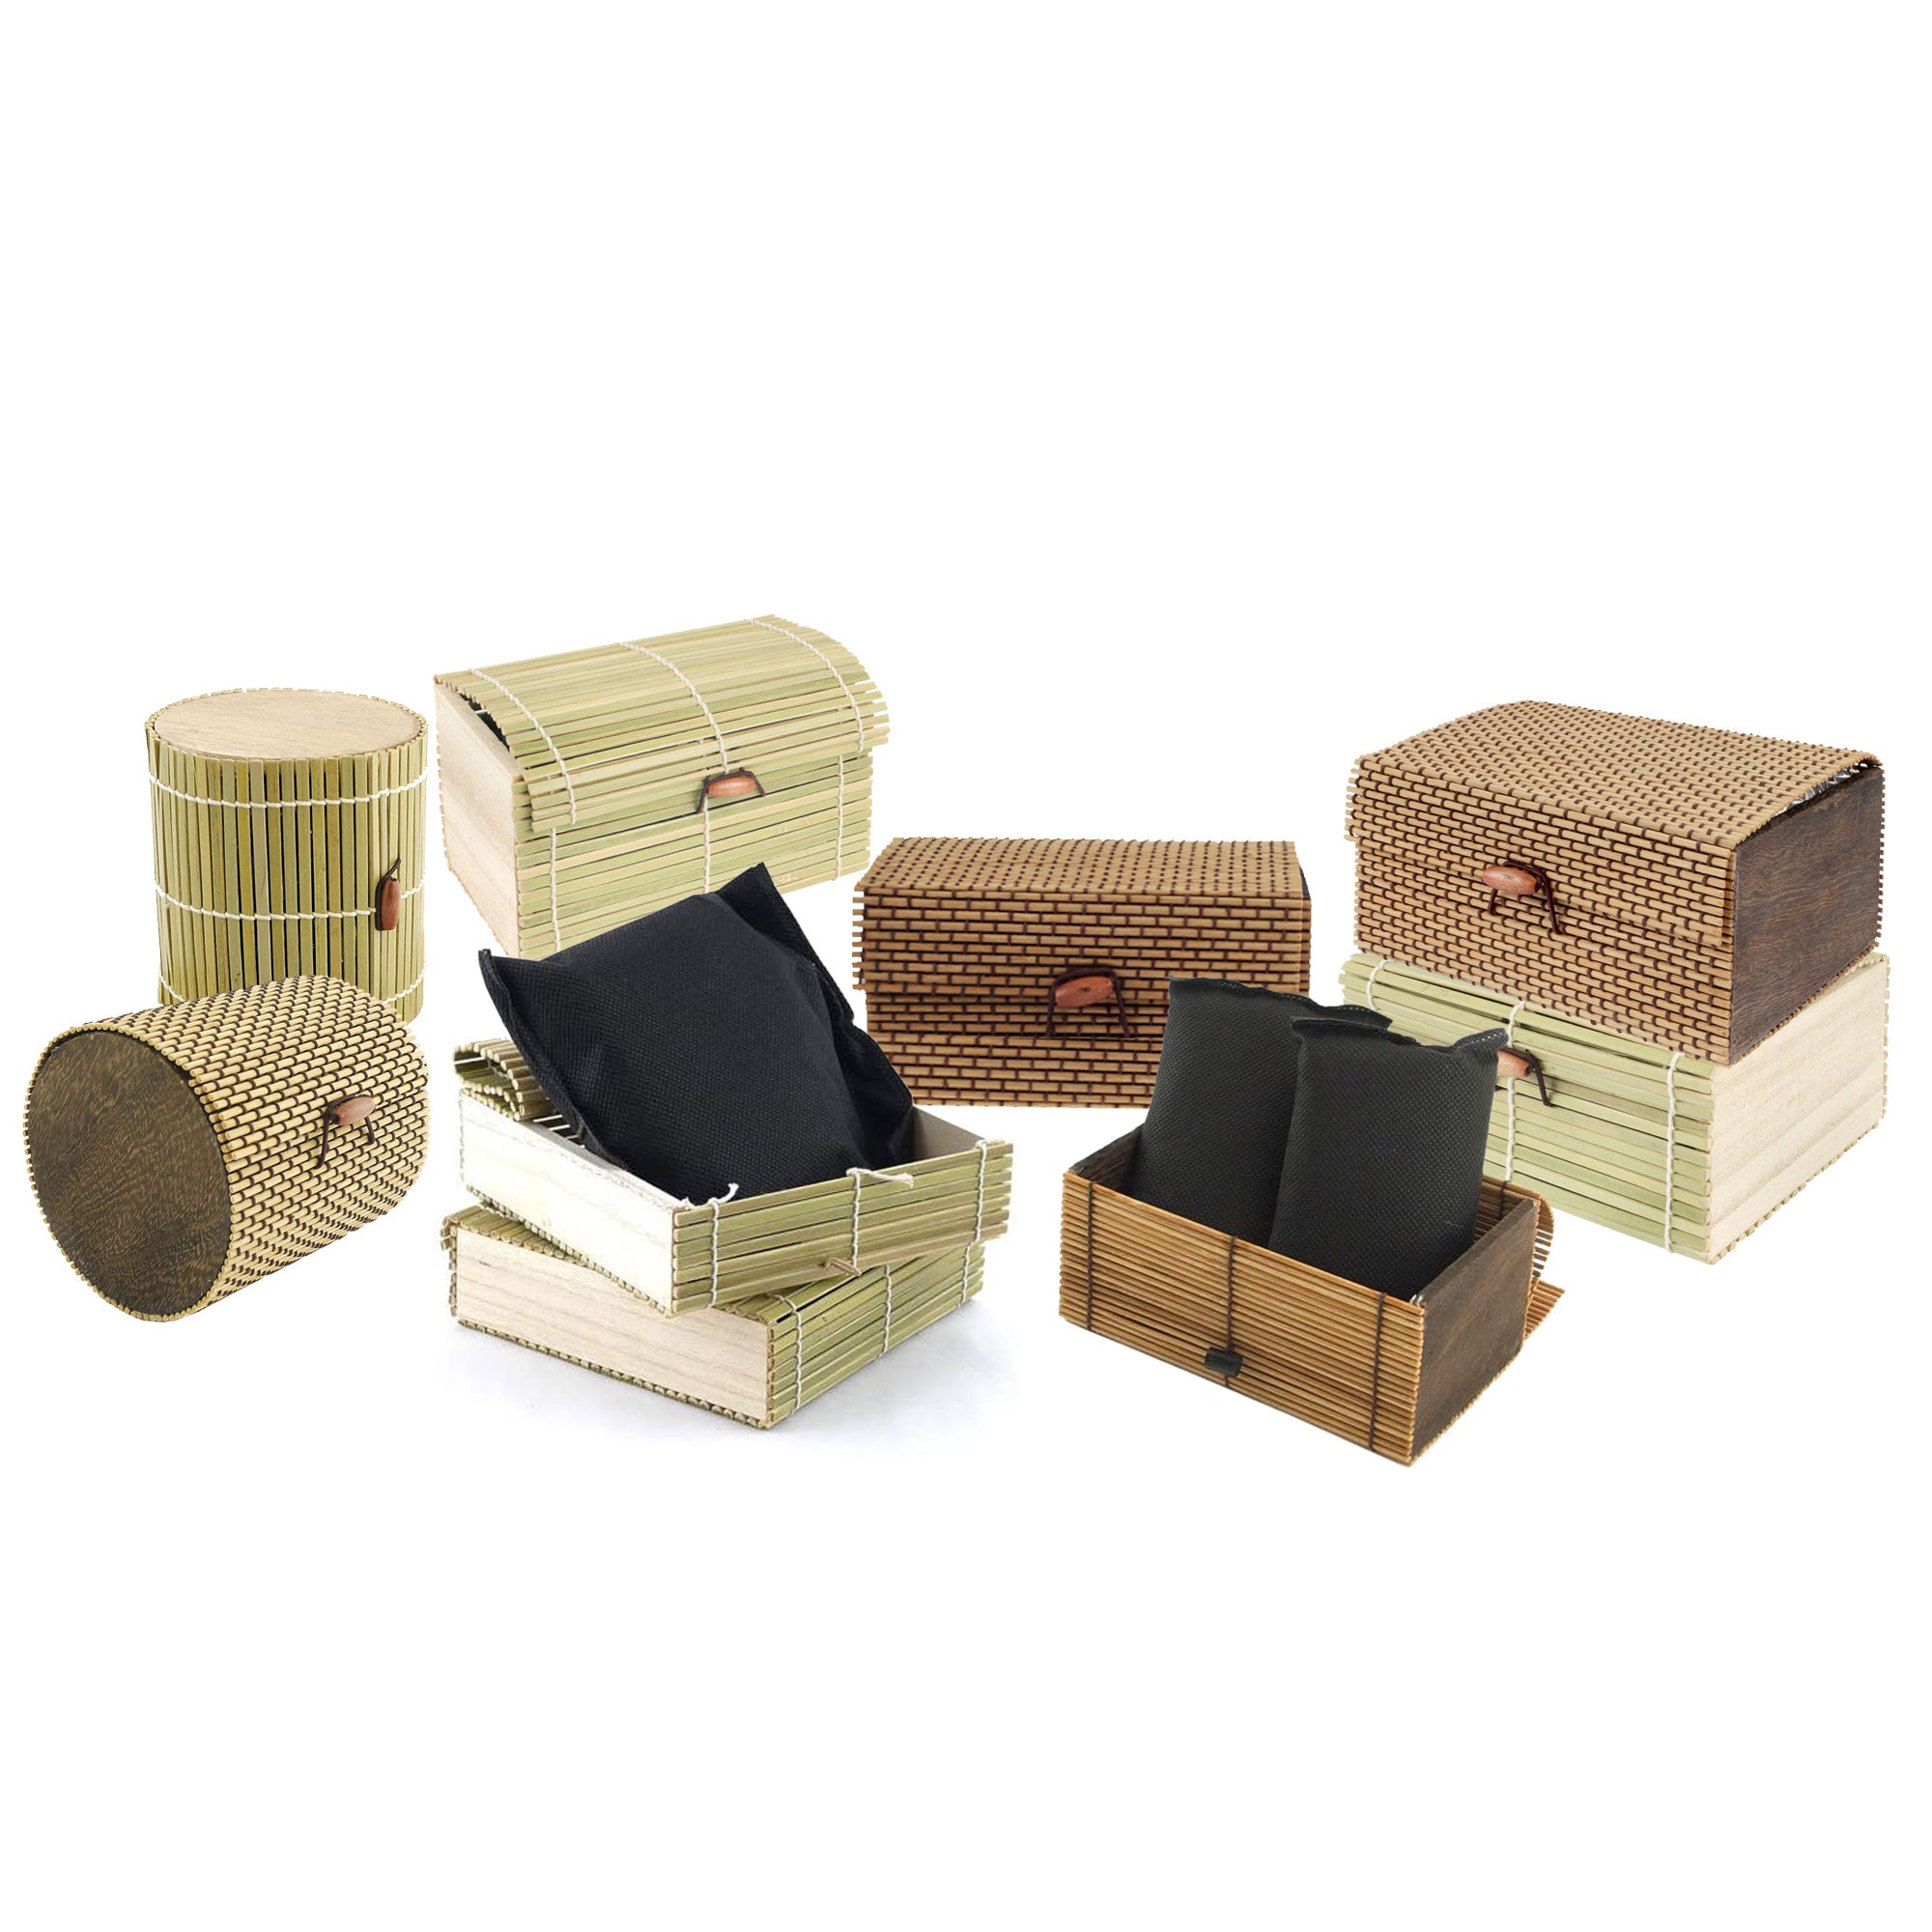 Purchase Wholesale bamboo lids. Free Returns & Net 60 Terms on Faire